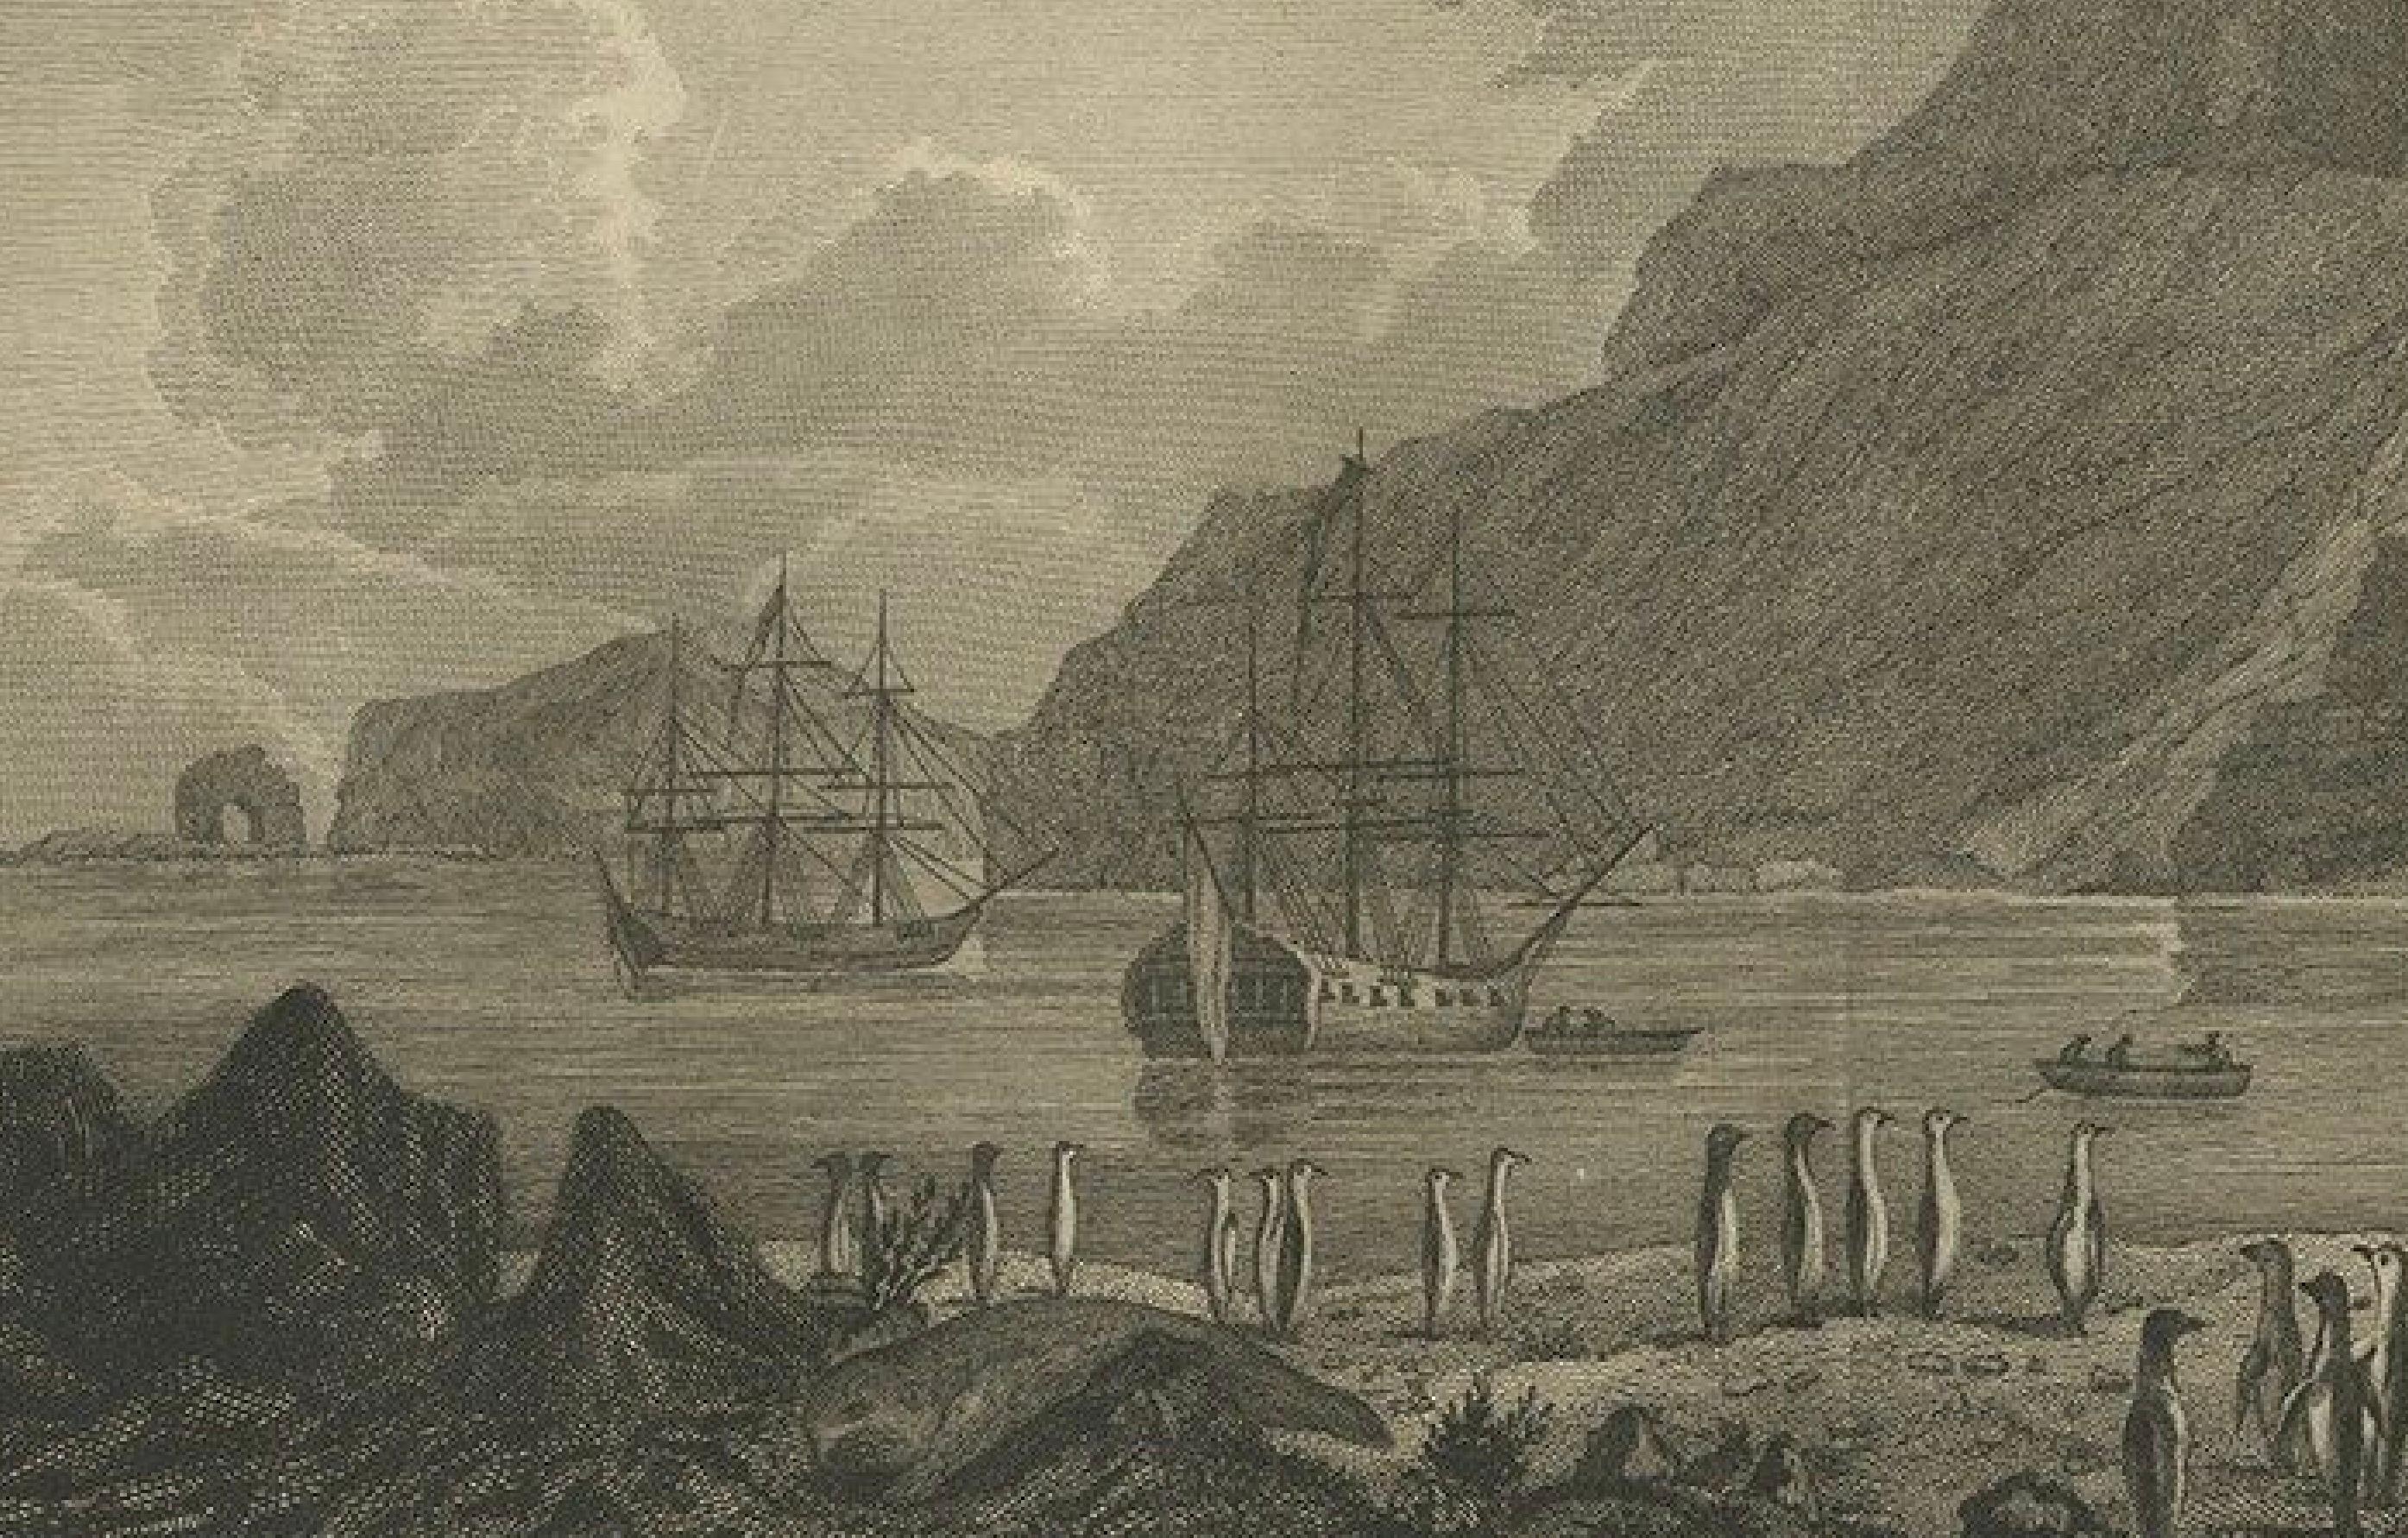 Paper Antique Print of The Kerguelen Islands or the Desolation Islands by Cook, 1803